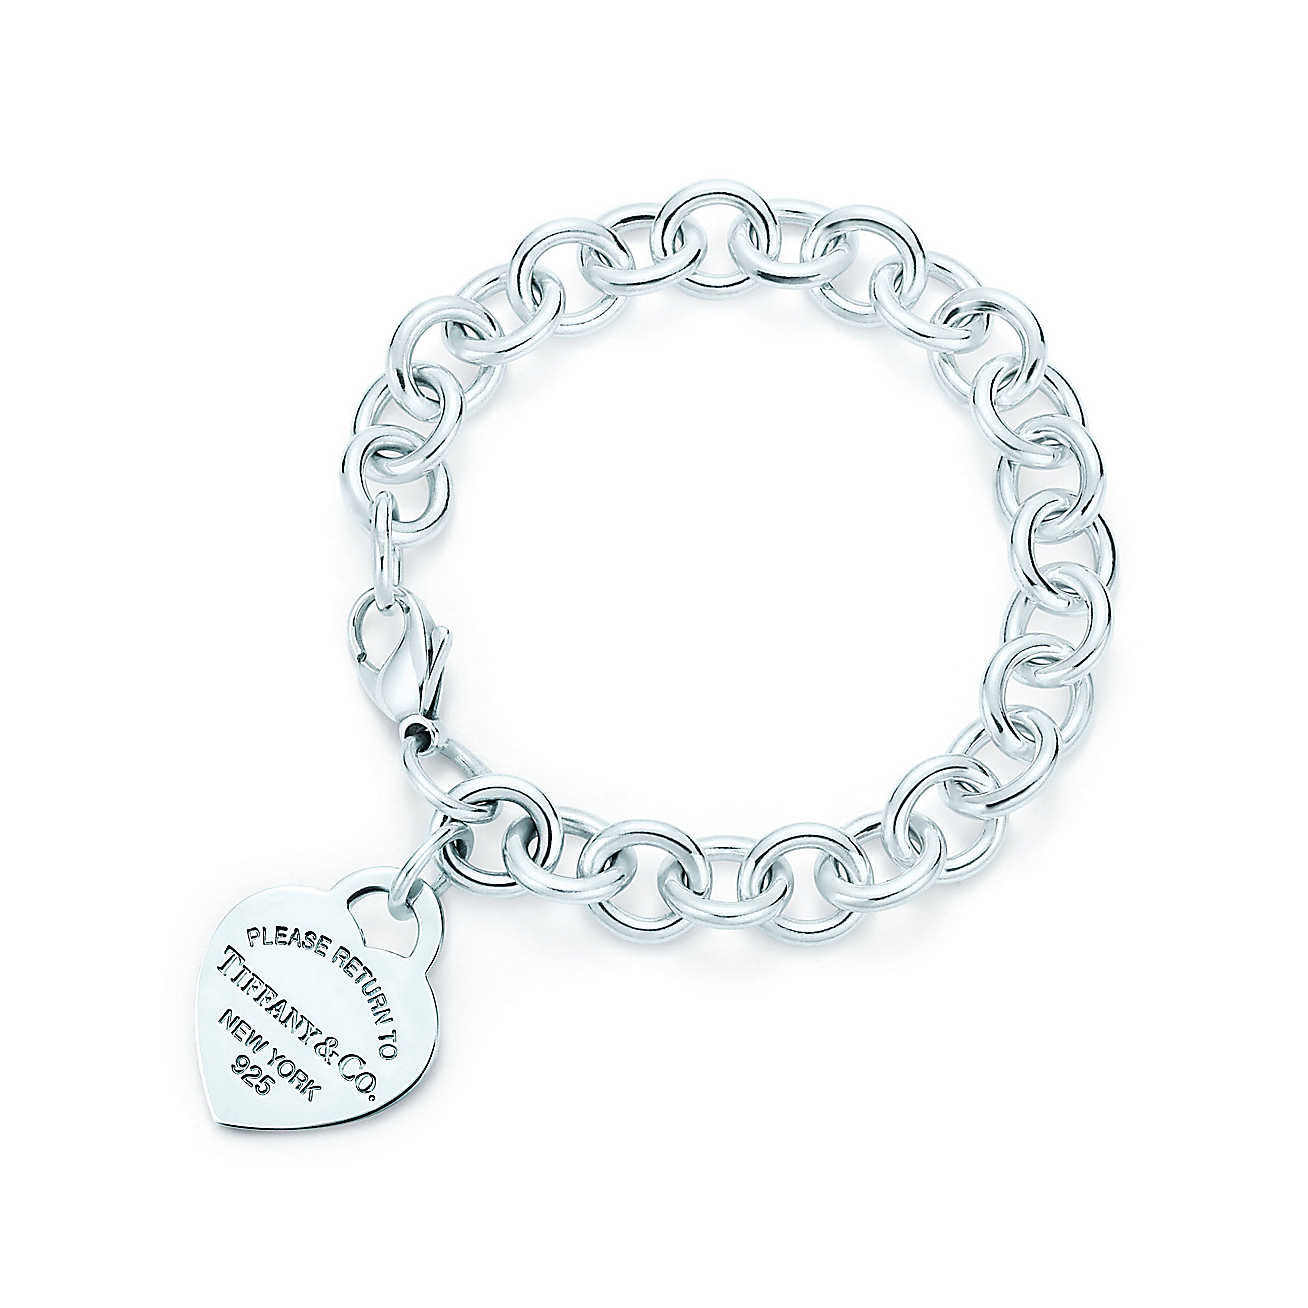 Tiffany And Co Heart Bracelet
 Return to Tiffany heart tag charm bracelet in sterling